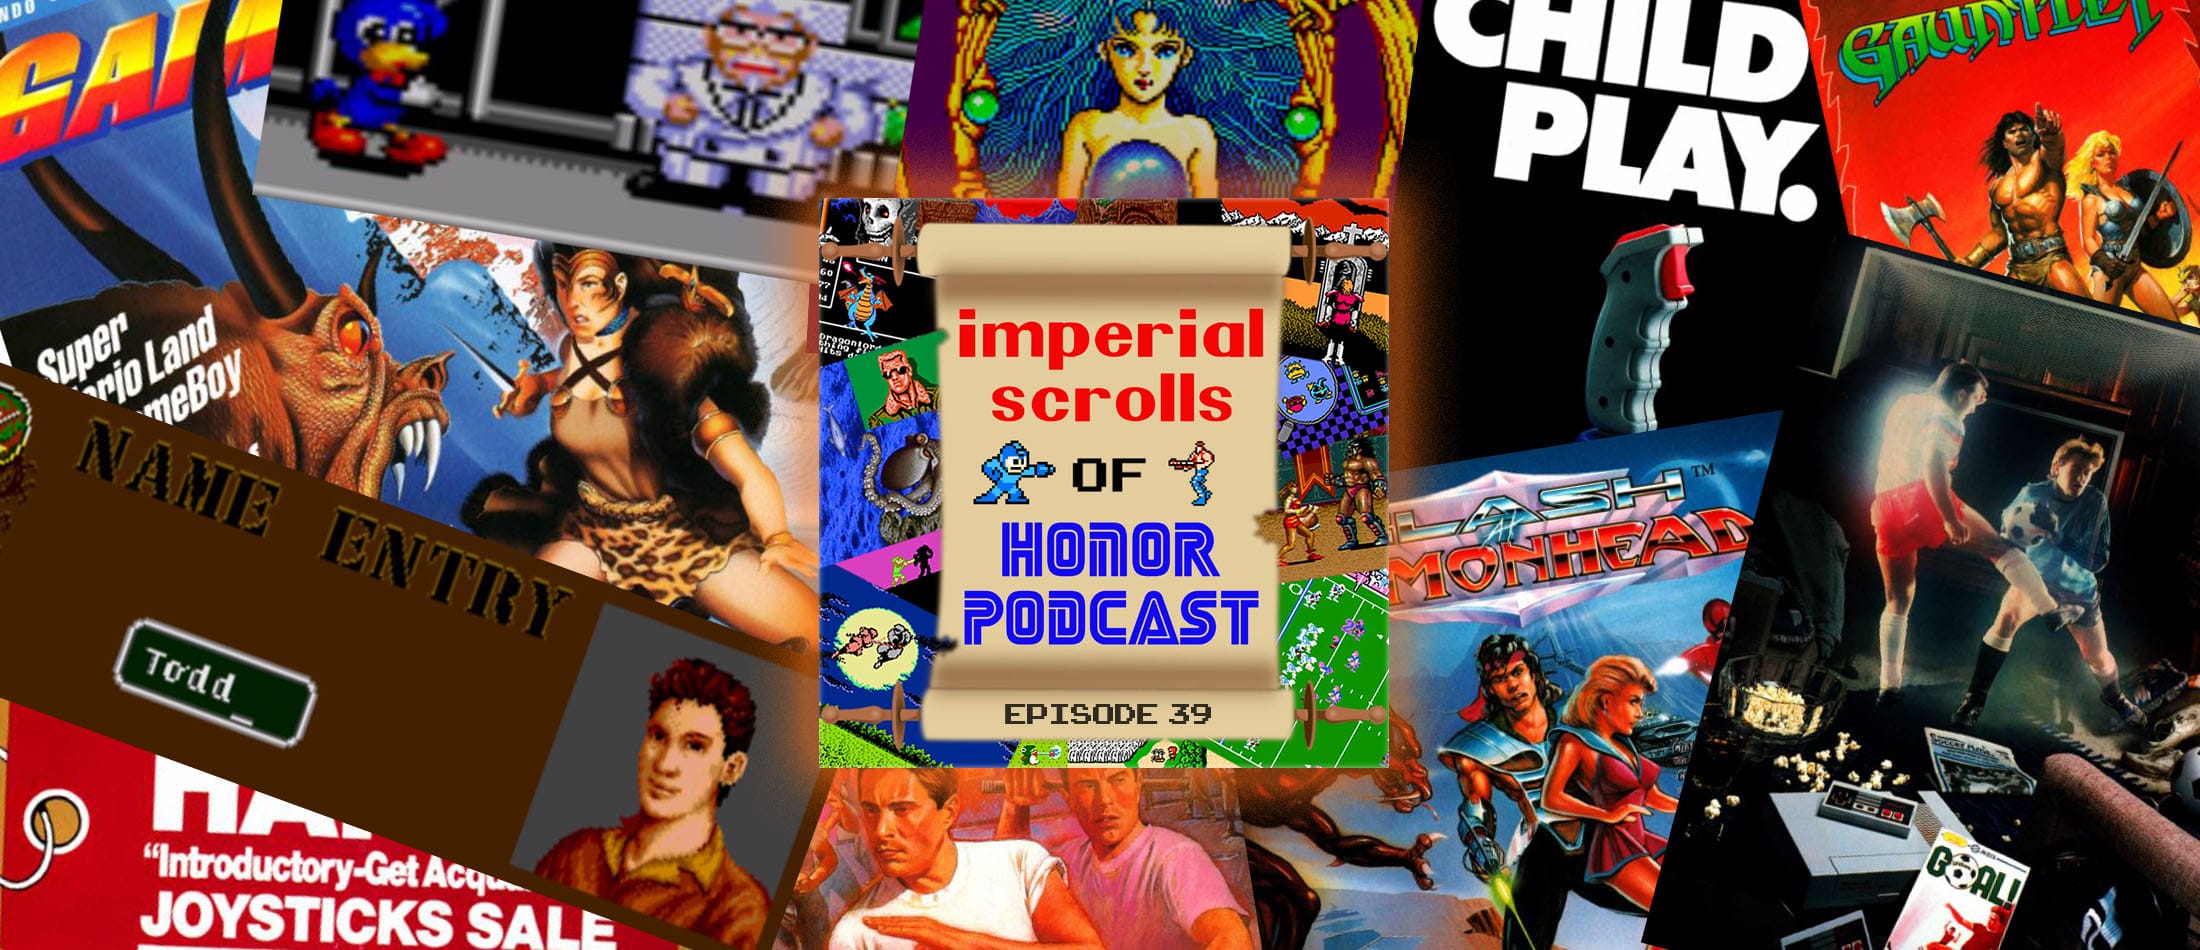 The Imperial Scrolls of Honor Podcast - Ep 39 - GamePro #4